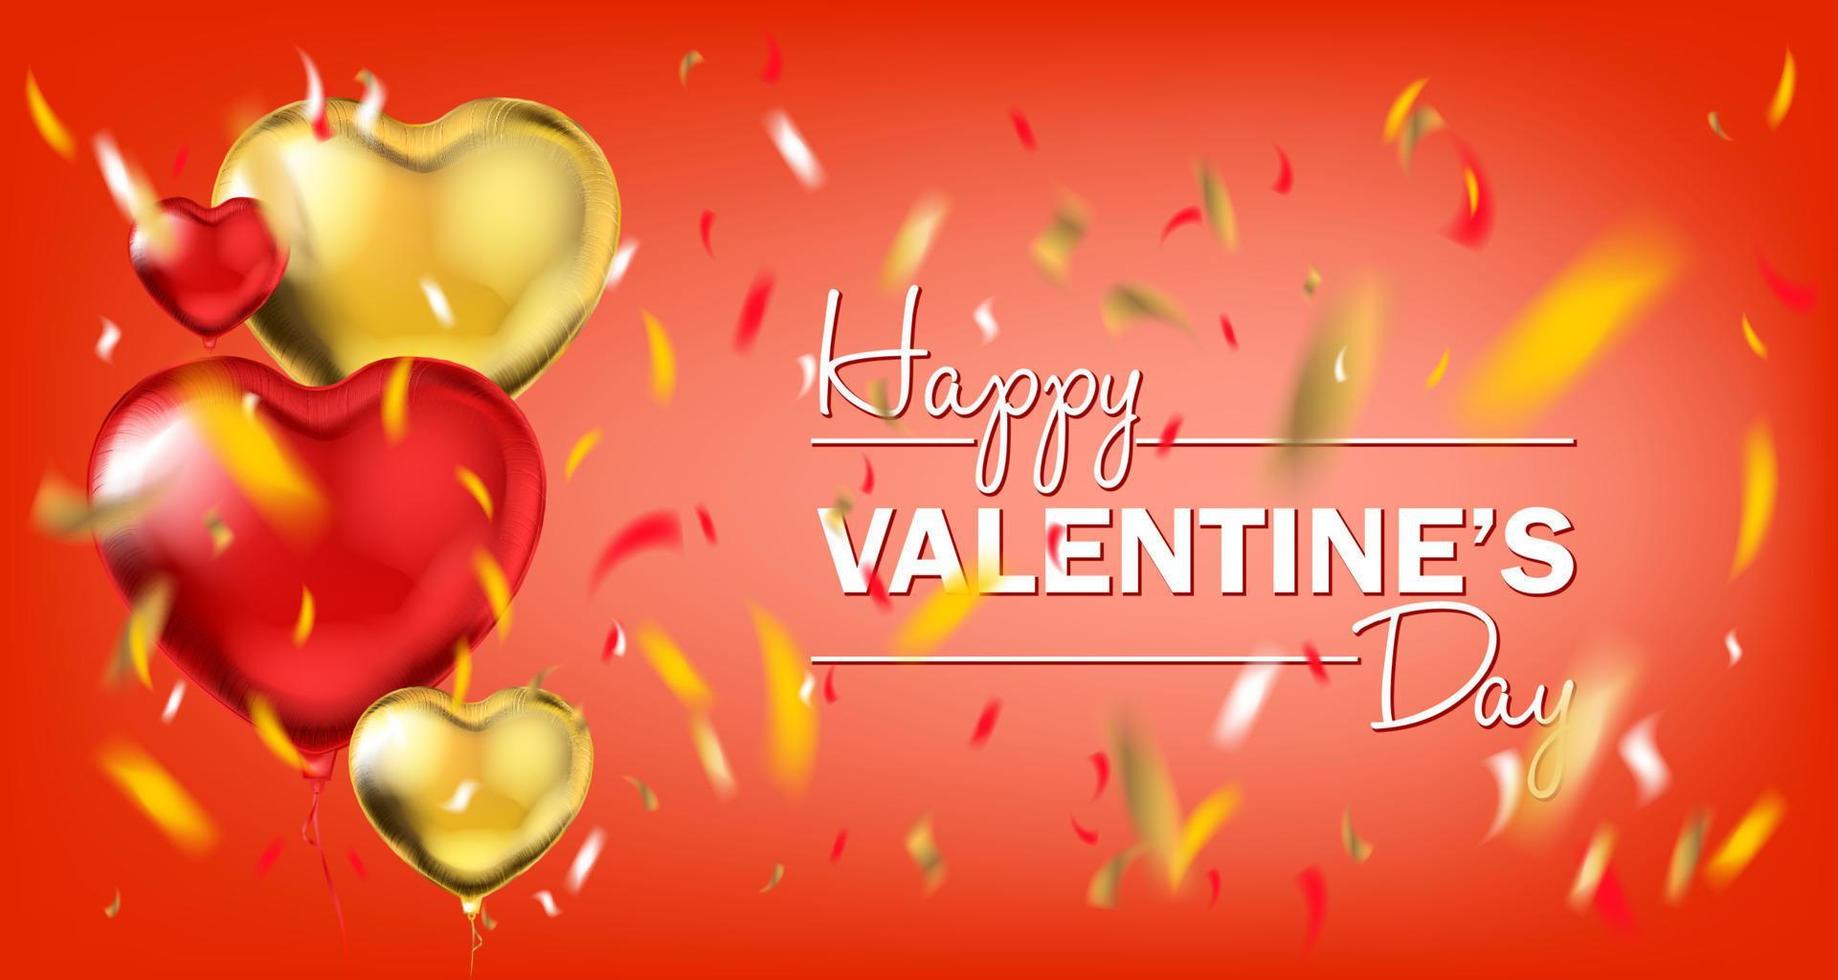 Red and Yellow Gold Foil Heart Shape Balloons and Happy Valentines Day Lettering vector